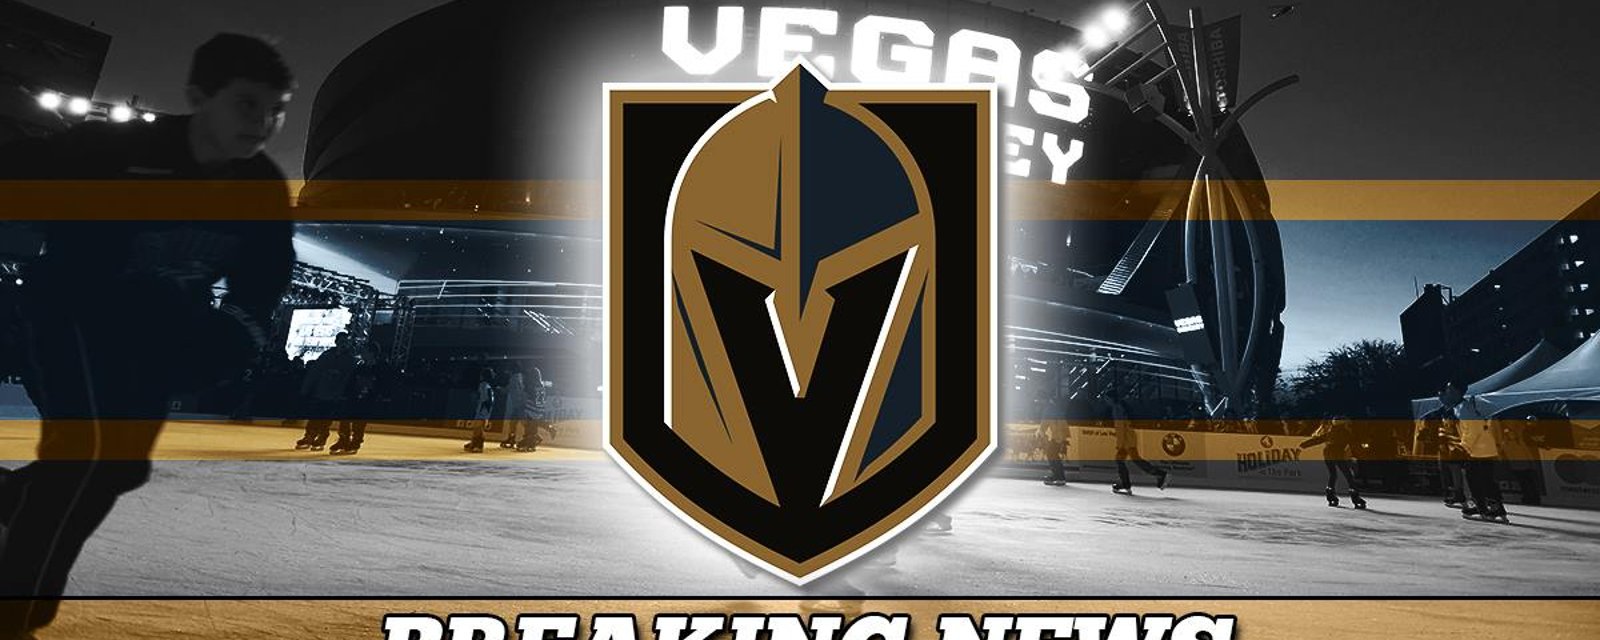 Breaking: huge announcement from Vegas sure to bring in more fans.